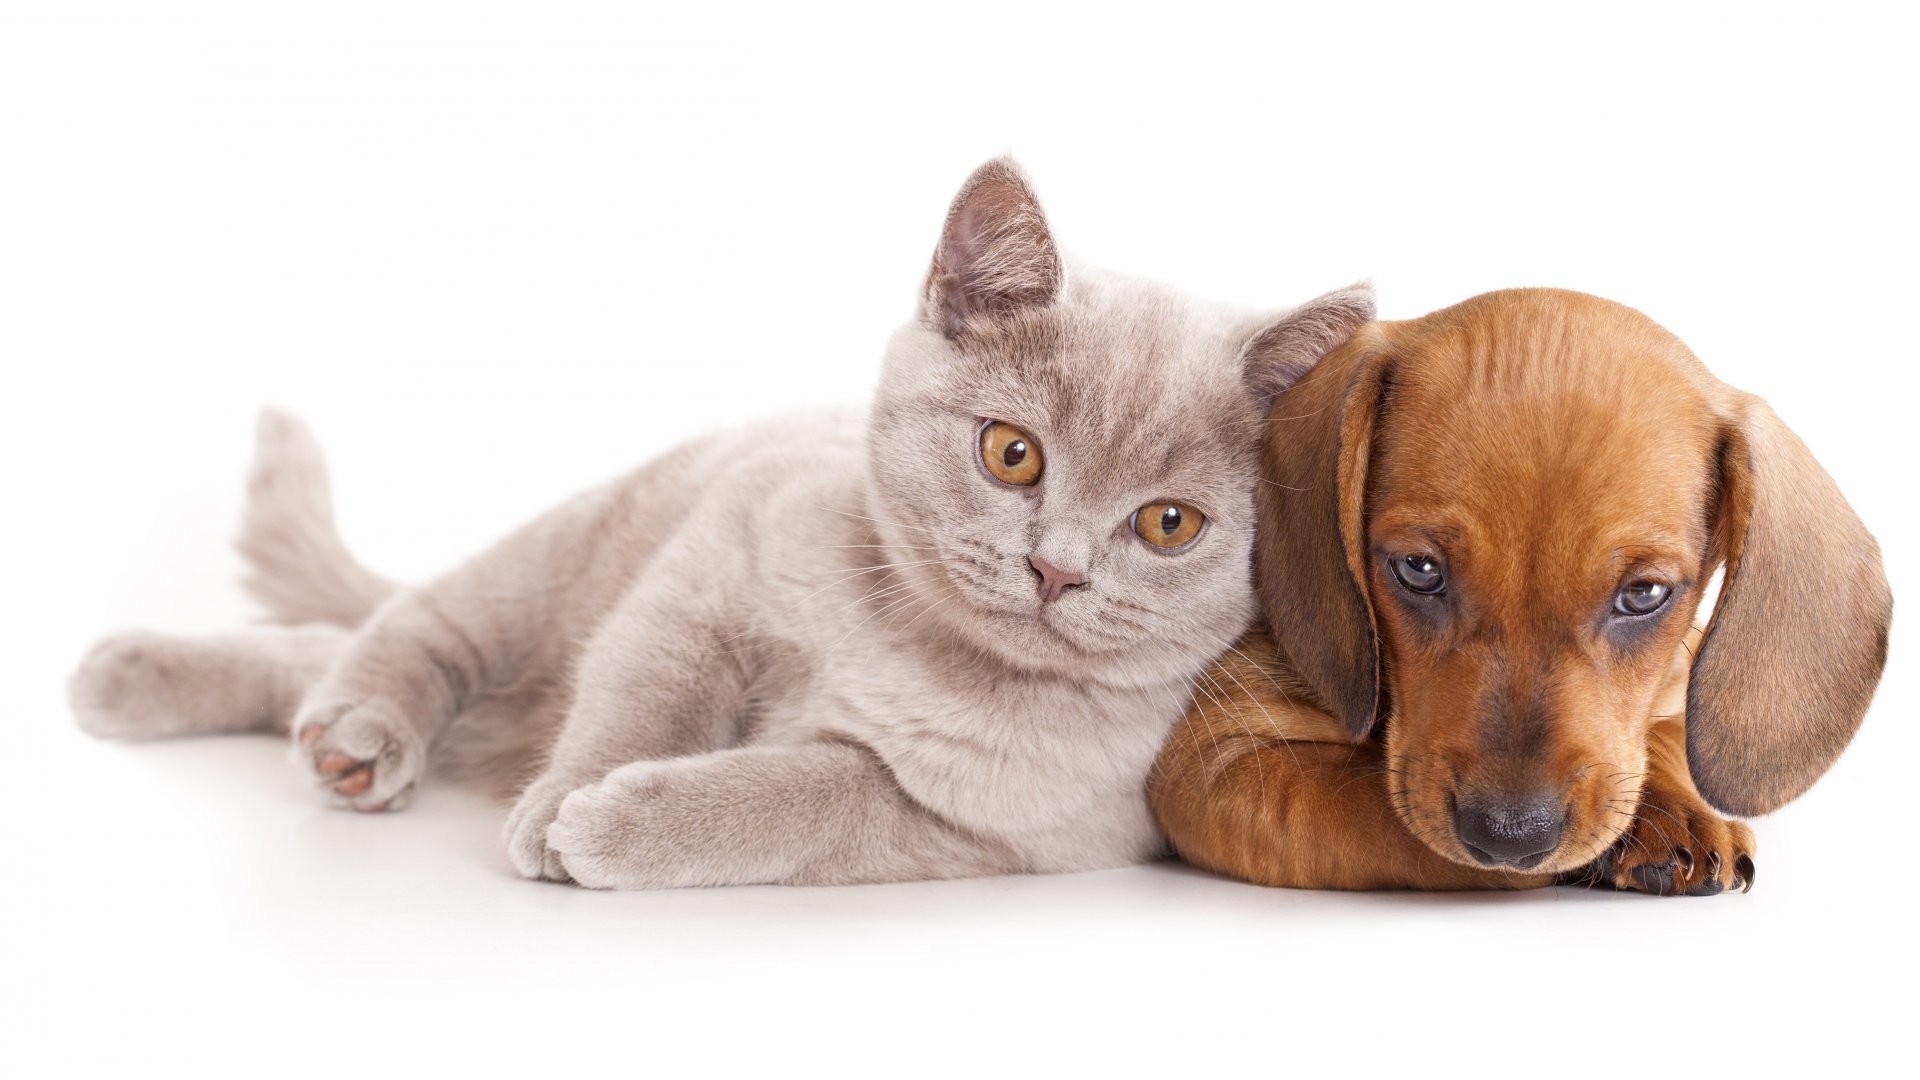 Best Cute cat dog free stock photos download